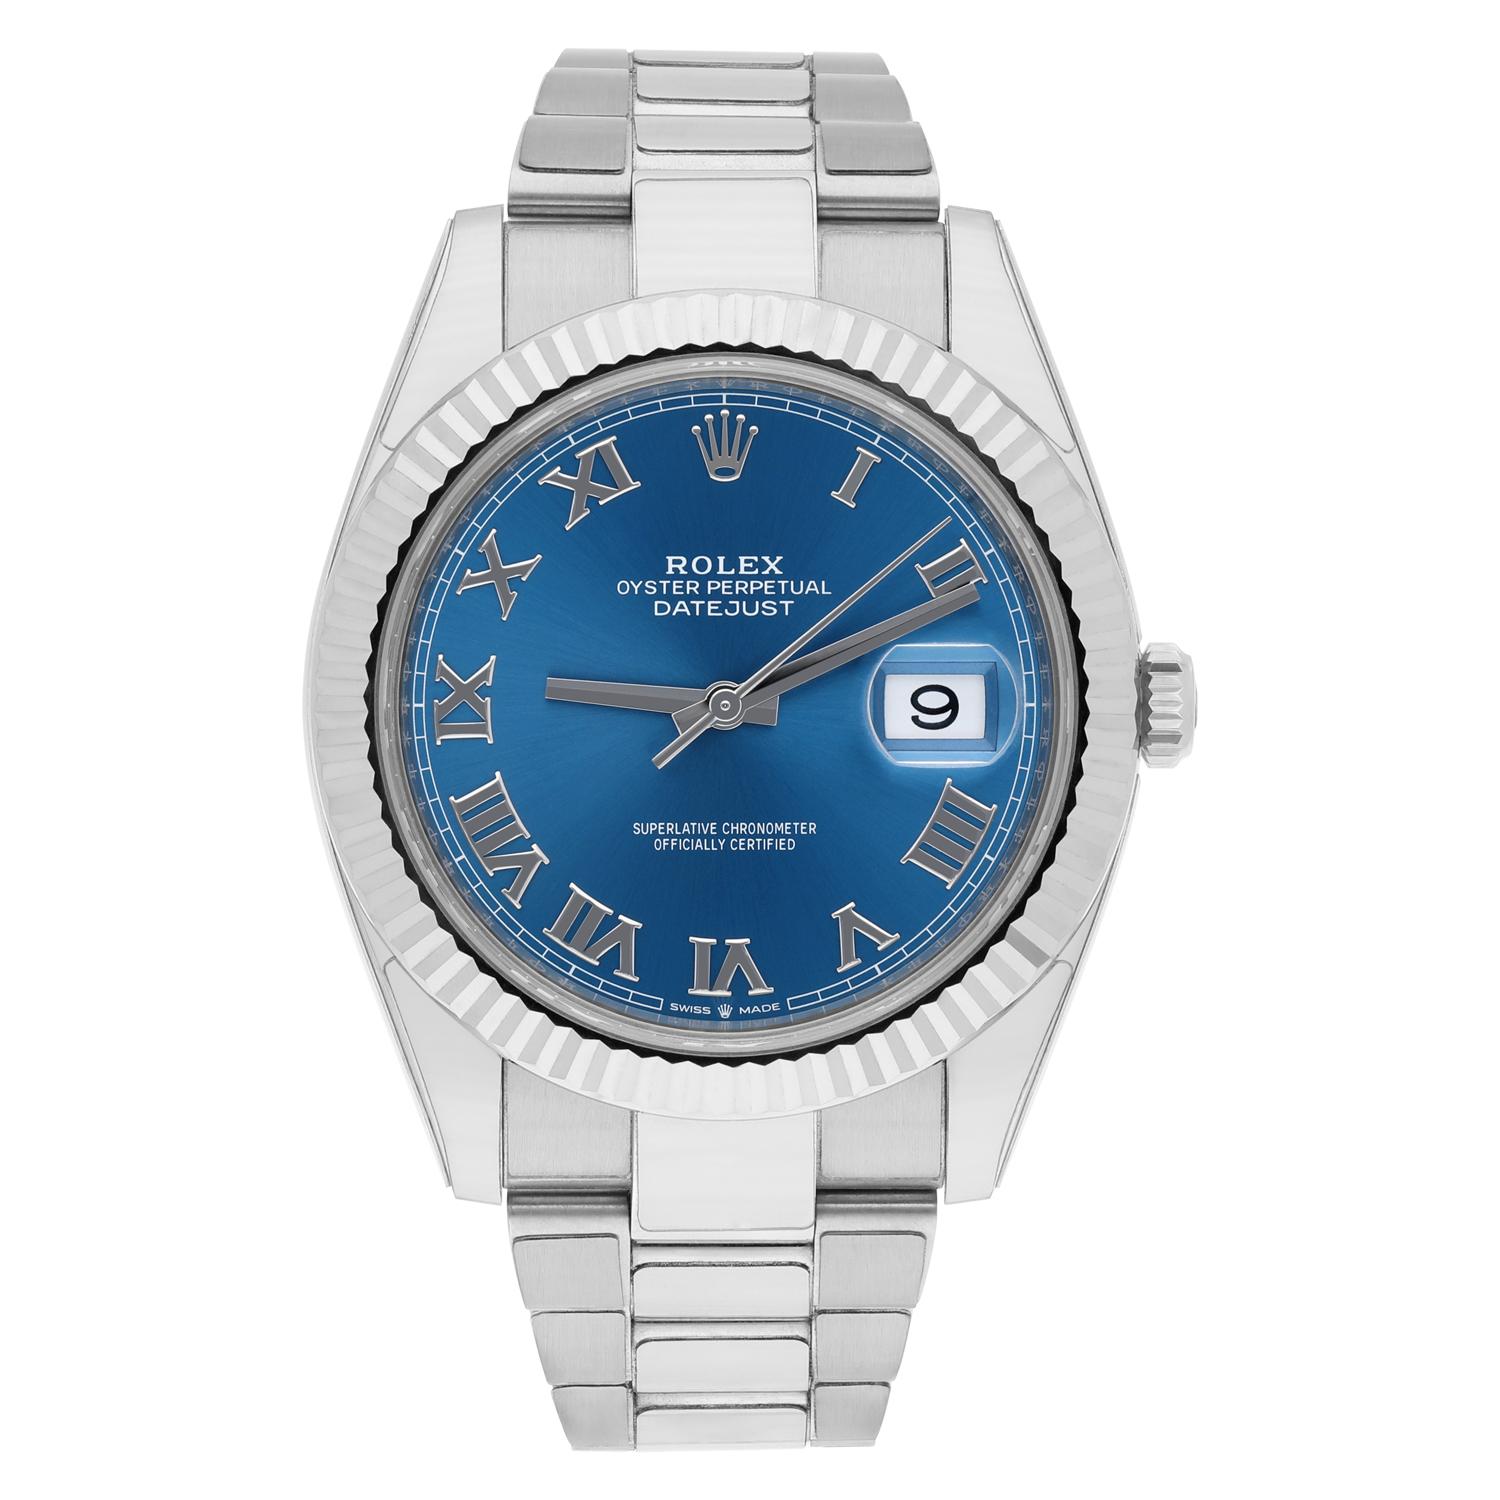 This magnificent Rolex Datejust wristwatch is a true masterpiece of Swiss craftsmanship. With its exquisite Blue Dial and elegant Roman numerals, it is the epitome of luxury and style. The 41mm stainless steel case and fluted bezel in white gold